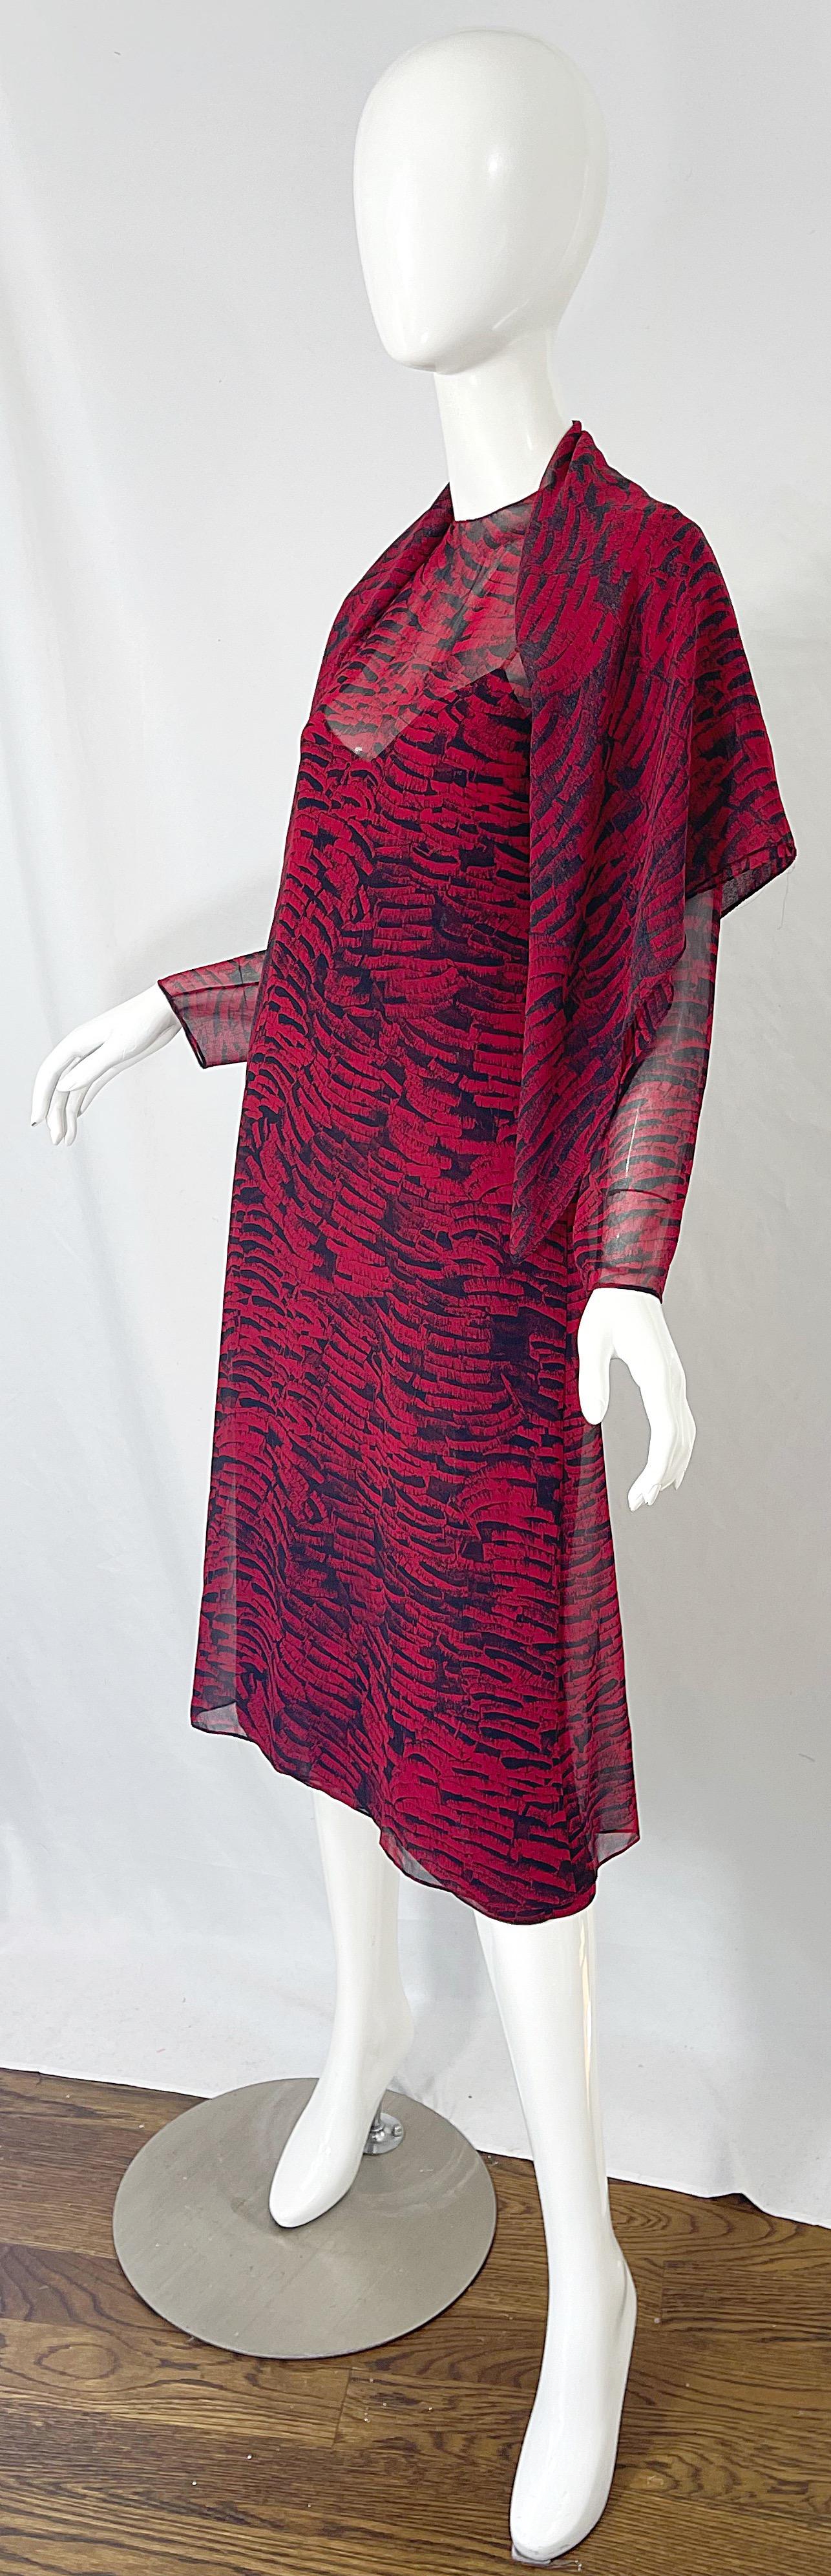 1970s Halston Red + Black Abstract Animal Print Three Piece 70s Dress Ensemble For Sale 8